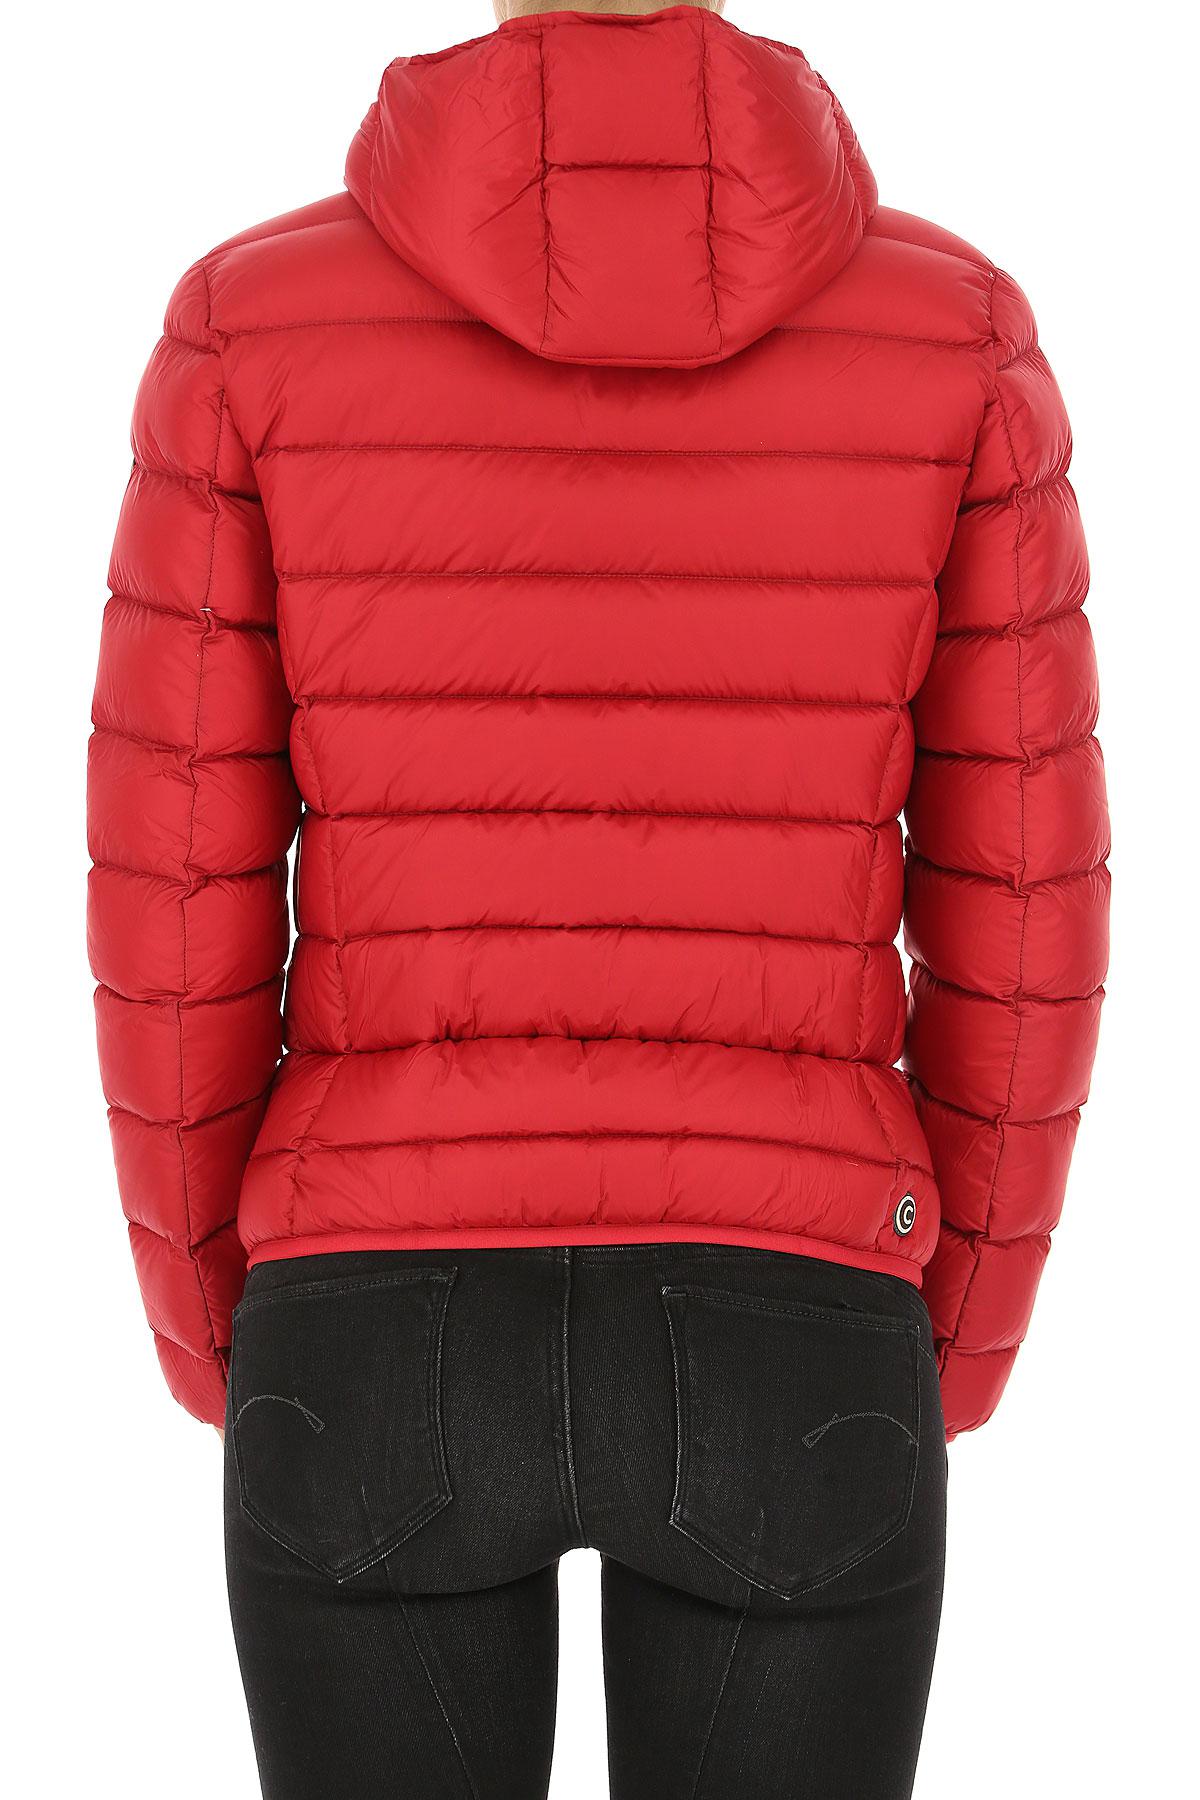 Colmar Down Jacket For Women in Cherry Red (Red) - Lyst